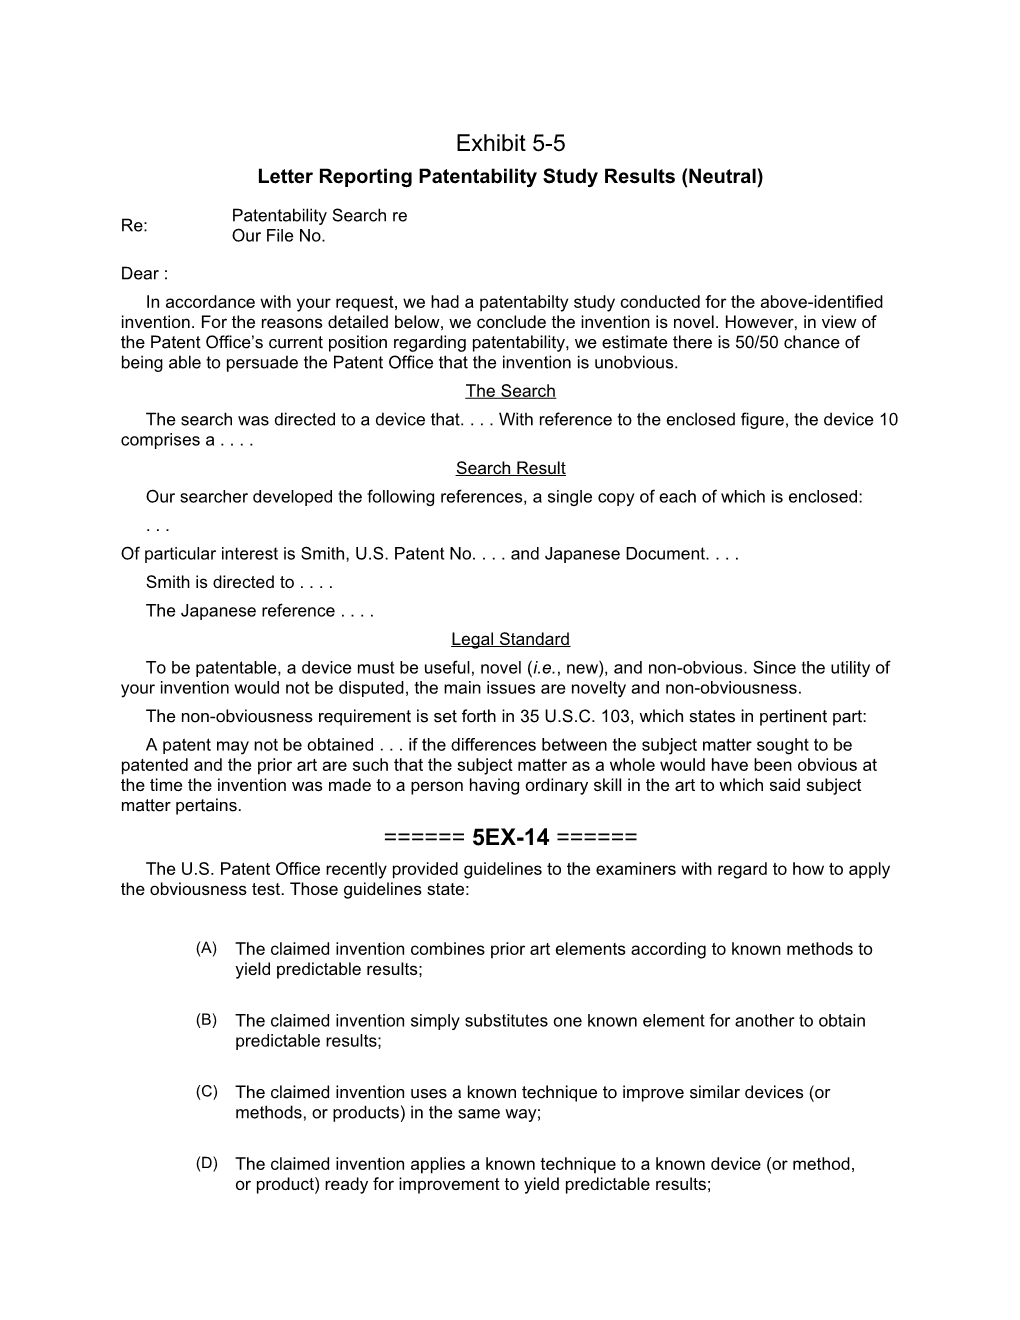 Letter Reporting Patentability Study Results (Neutral)